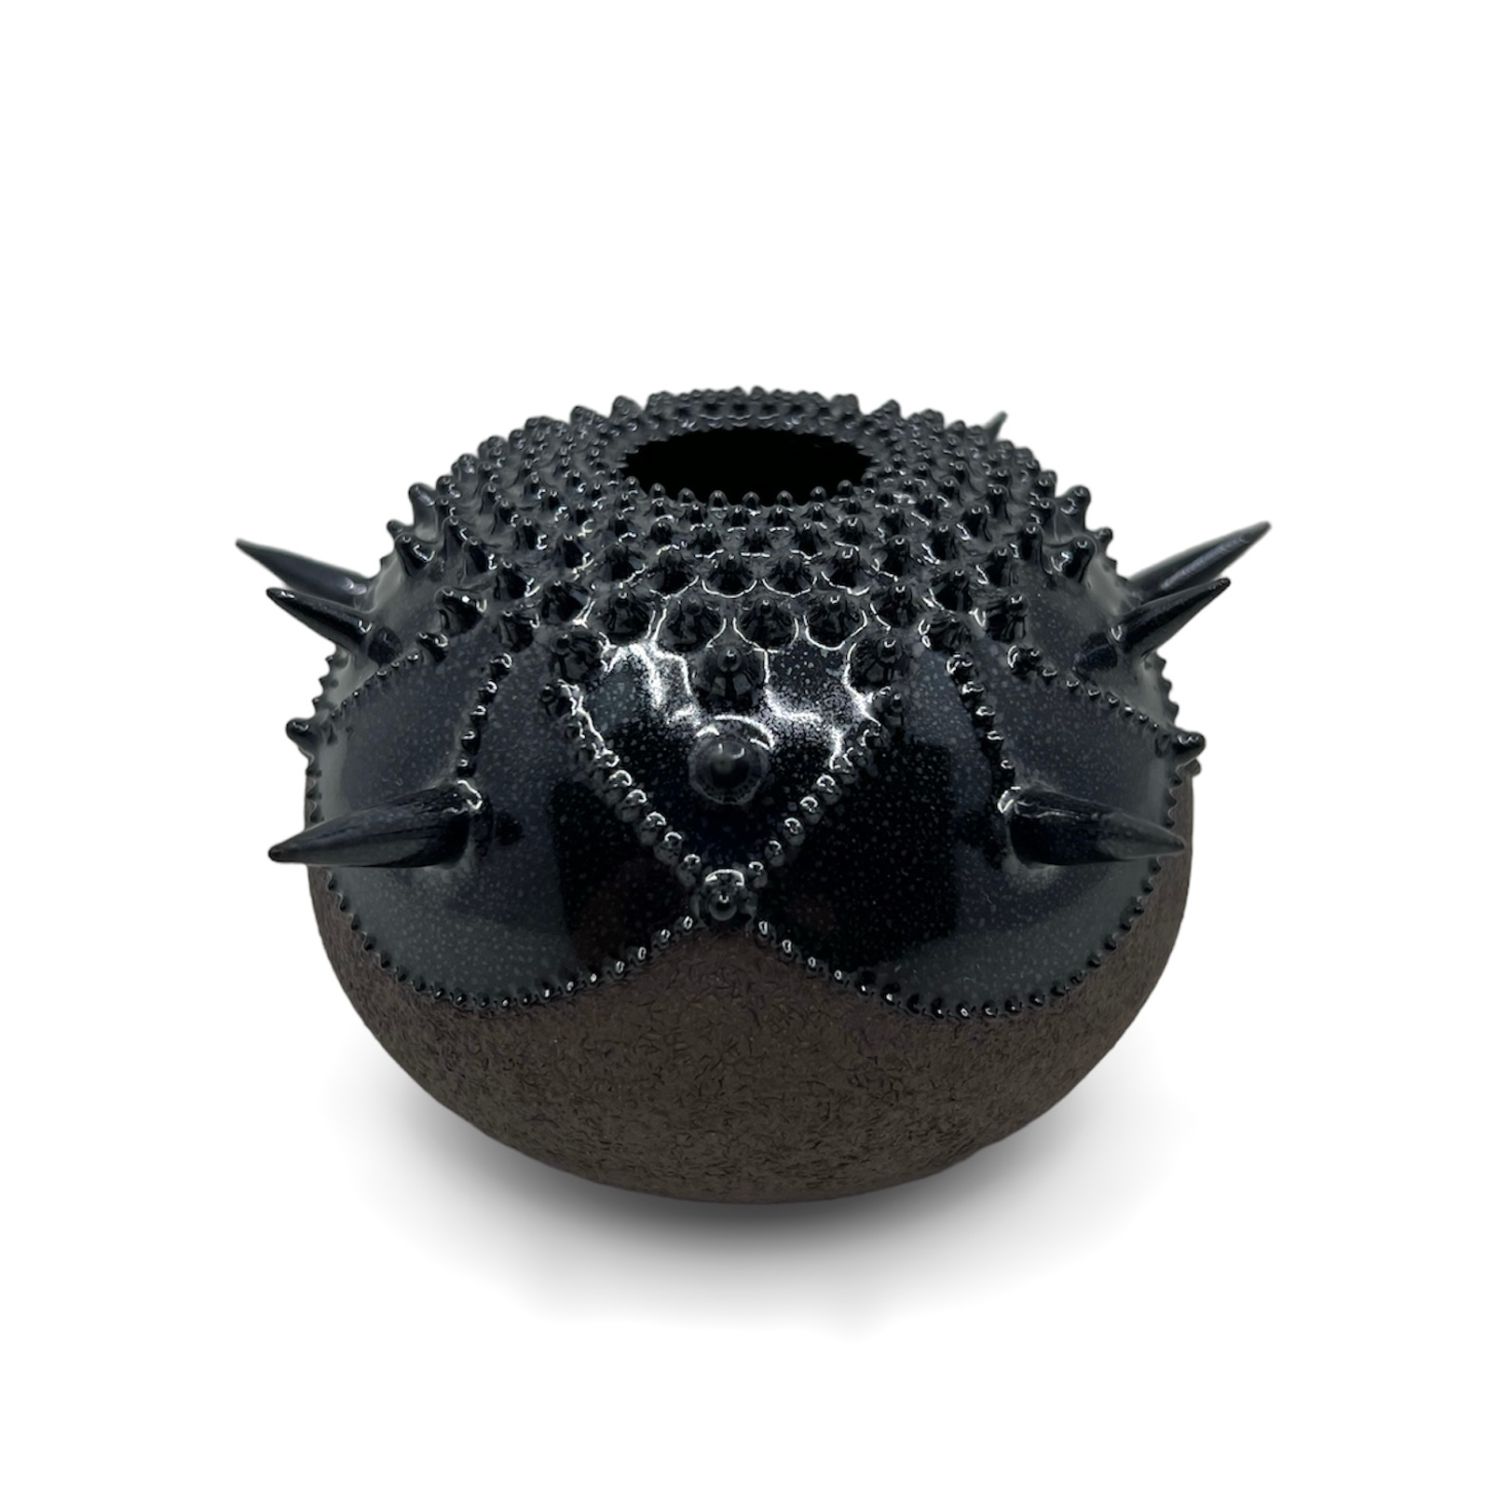 Zara Gardner: Black Urchin Sculpture with Spikes Product Image 3 of 4